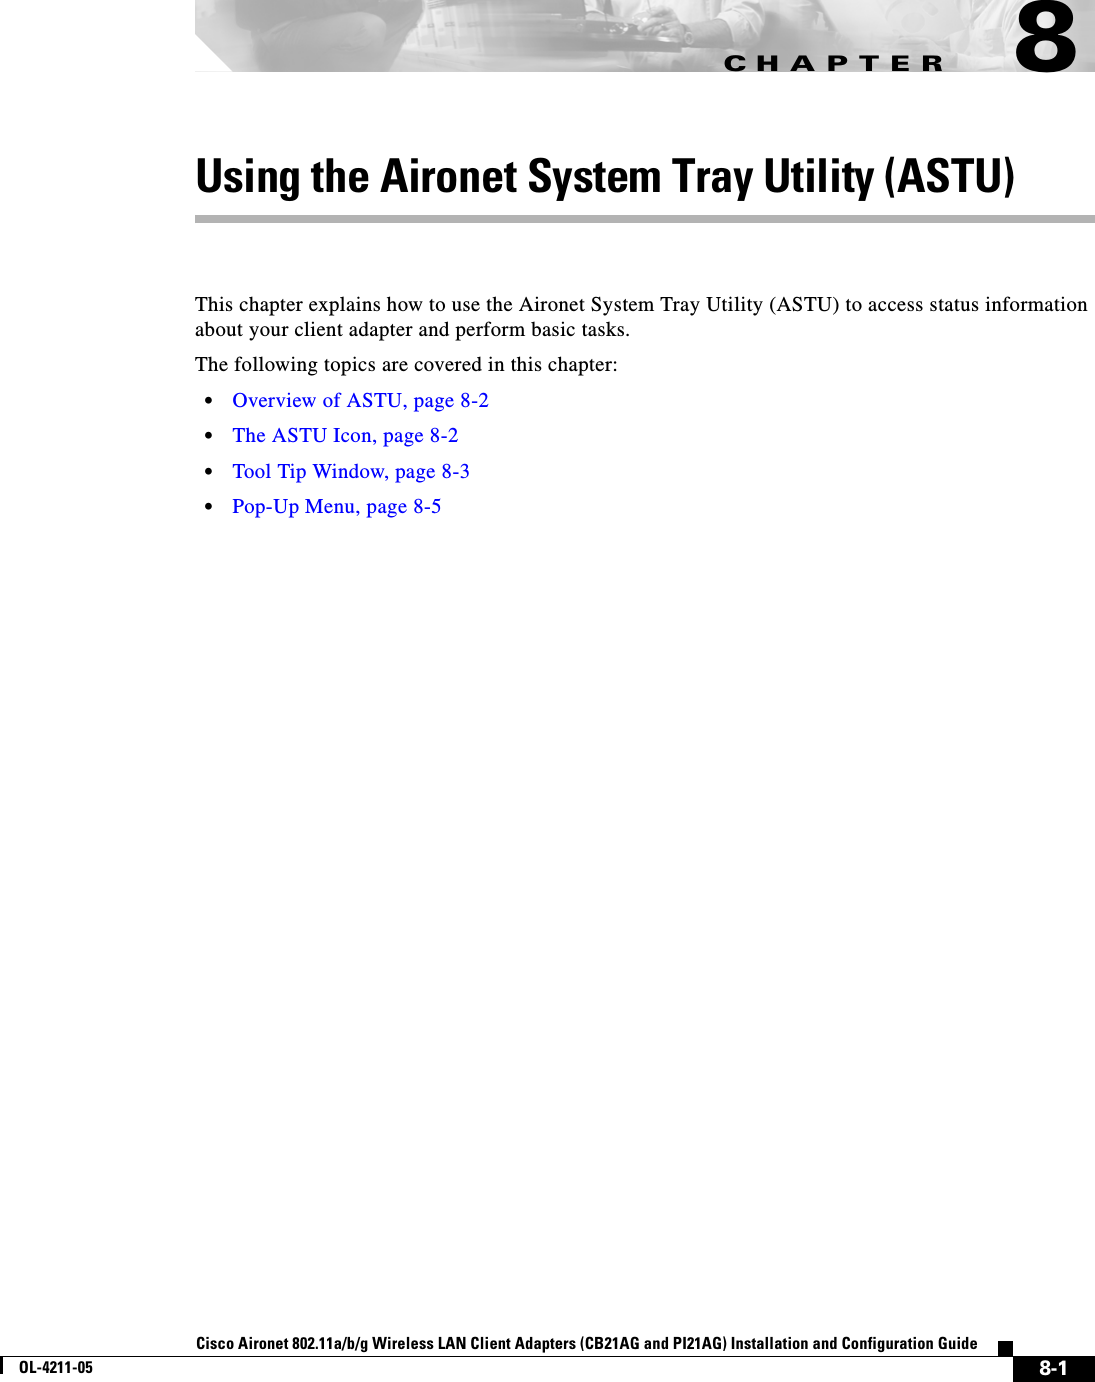 CHAPTER8-1Cisco Aironet 802.11a/b/g Wireless LAN Client Adapters (CB21AG and PI21AG) Installation and Configuration GuideOL-4211-058Using the Aironet System Tray Utility (ASTU)This chapter explains how to use the Aironet System Tray Utility (ASTU) to access status information about your client adapter and perform basic tasks.The following topics are covered in this chapter:•Overview of ASTU, page 8-2•The ASTU Icon, page 8-2•Tool Tip Window, page 8-3•Pop-Up Menu, page 8-5